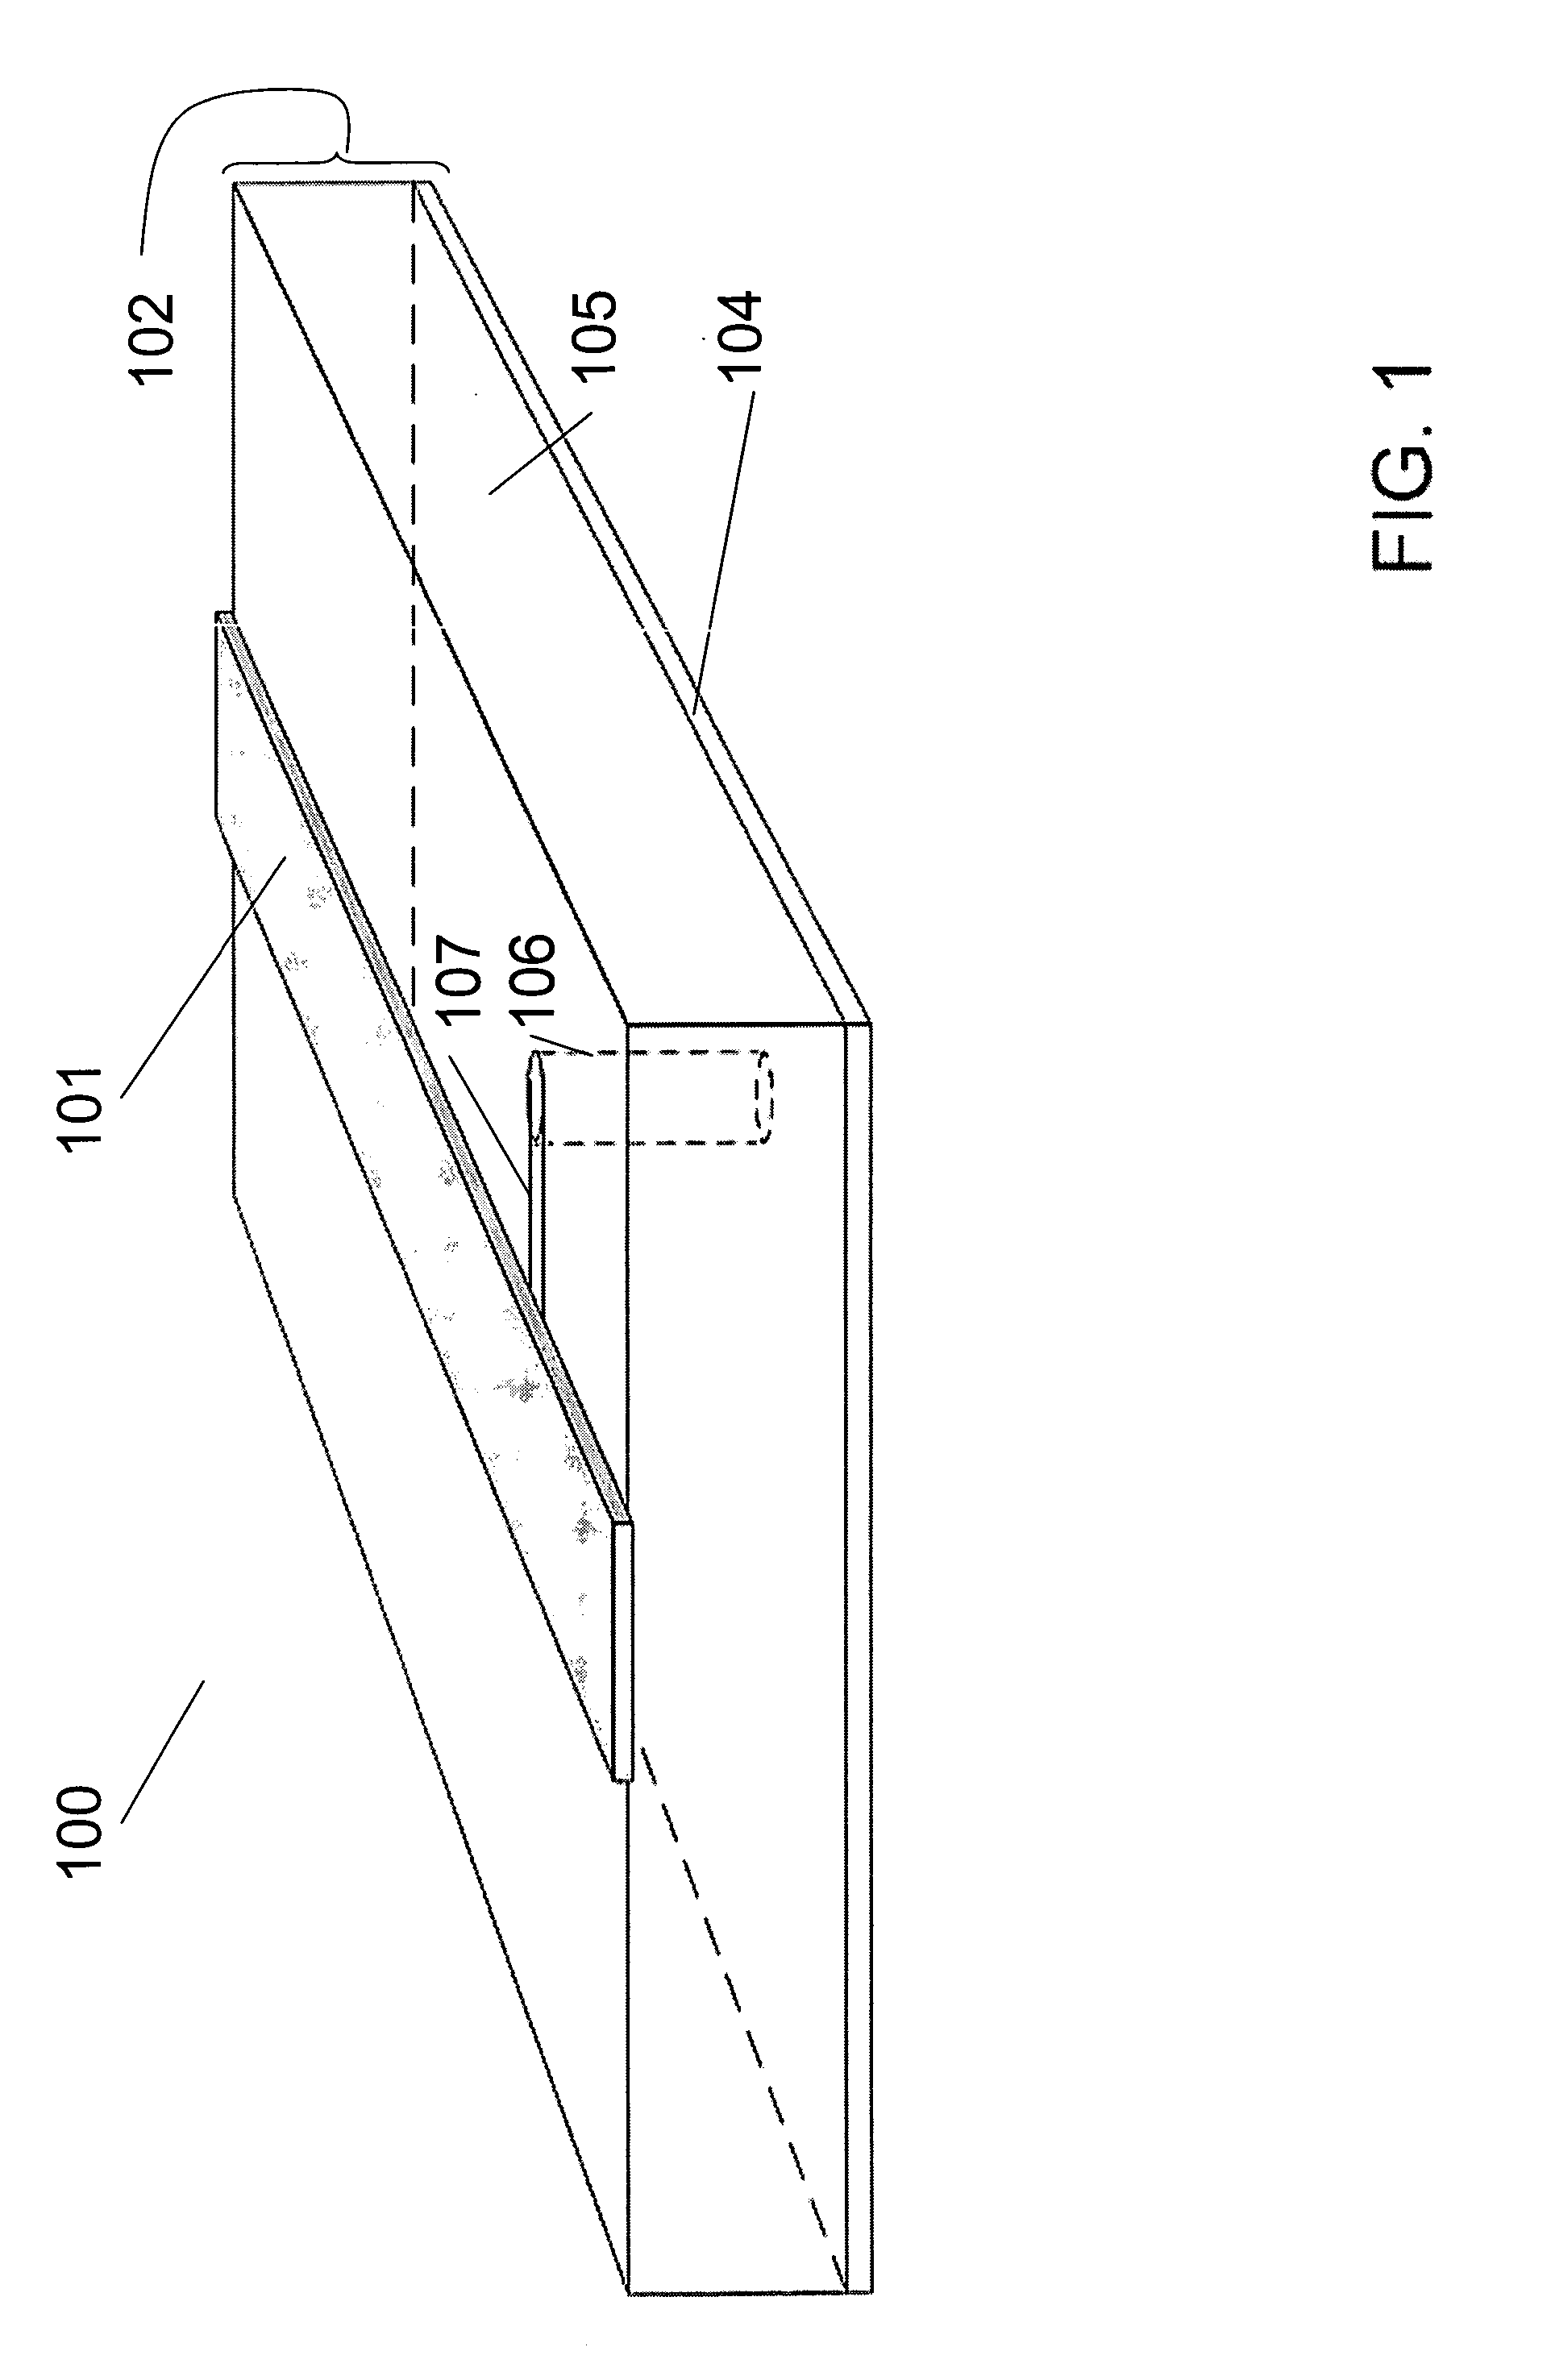 Low-loss transmission line structure